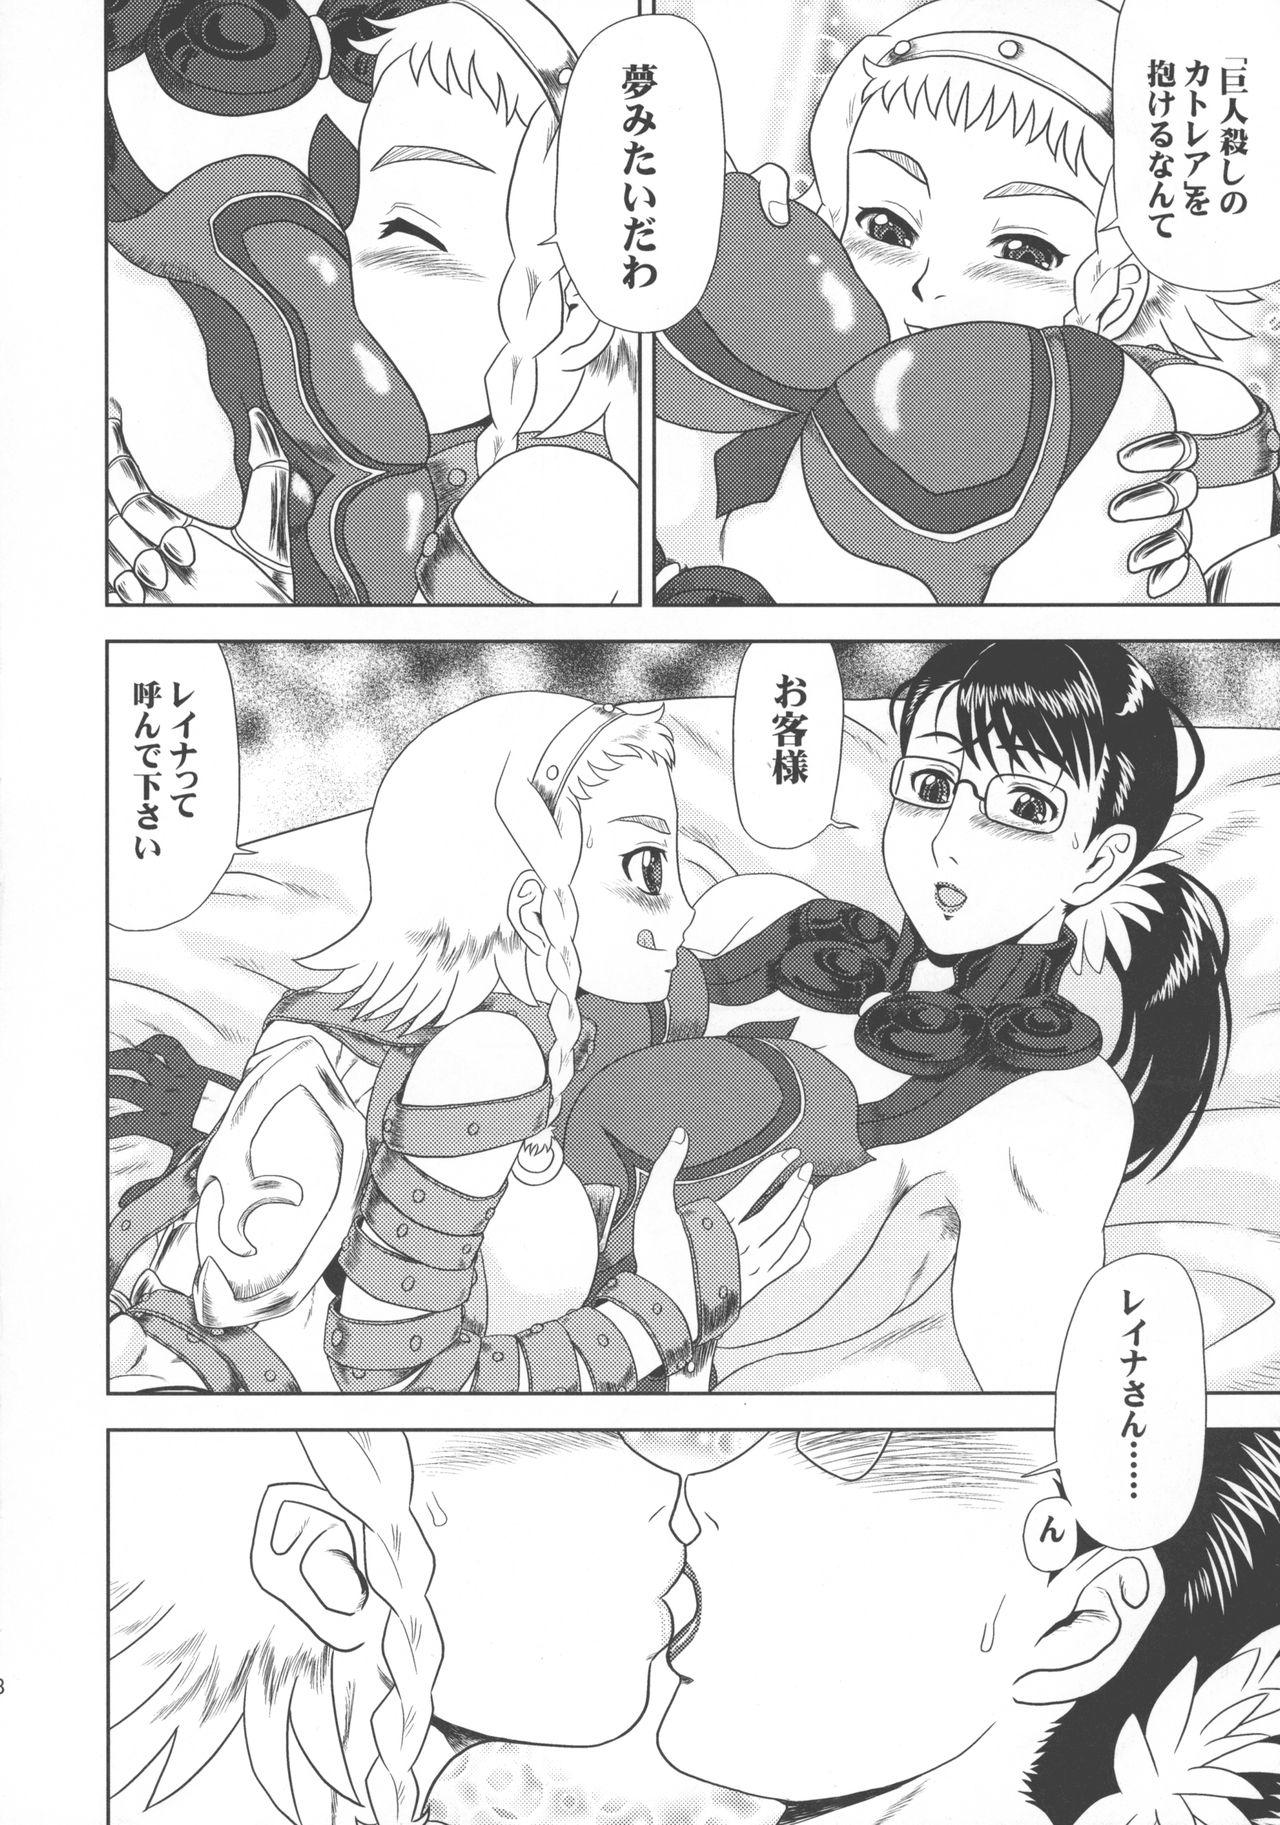 Chacal Hosoude Hanjouki - Queens blade Clothed - Page 8